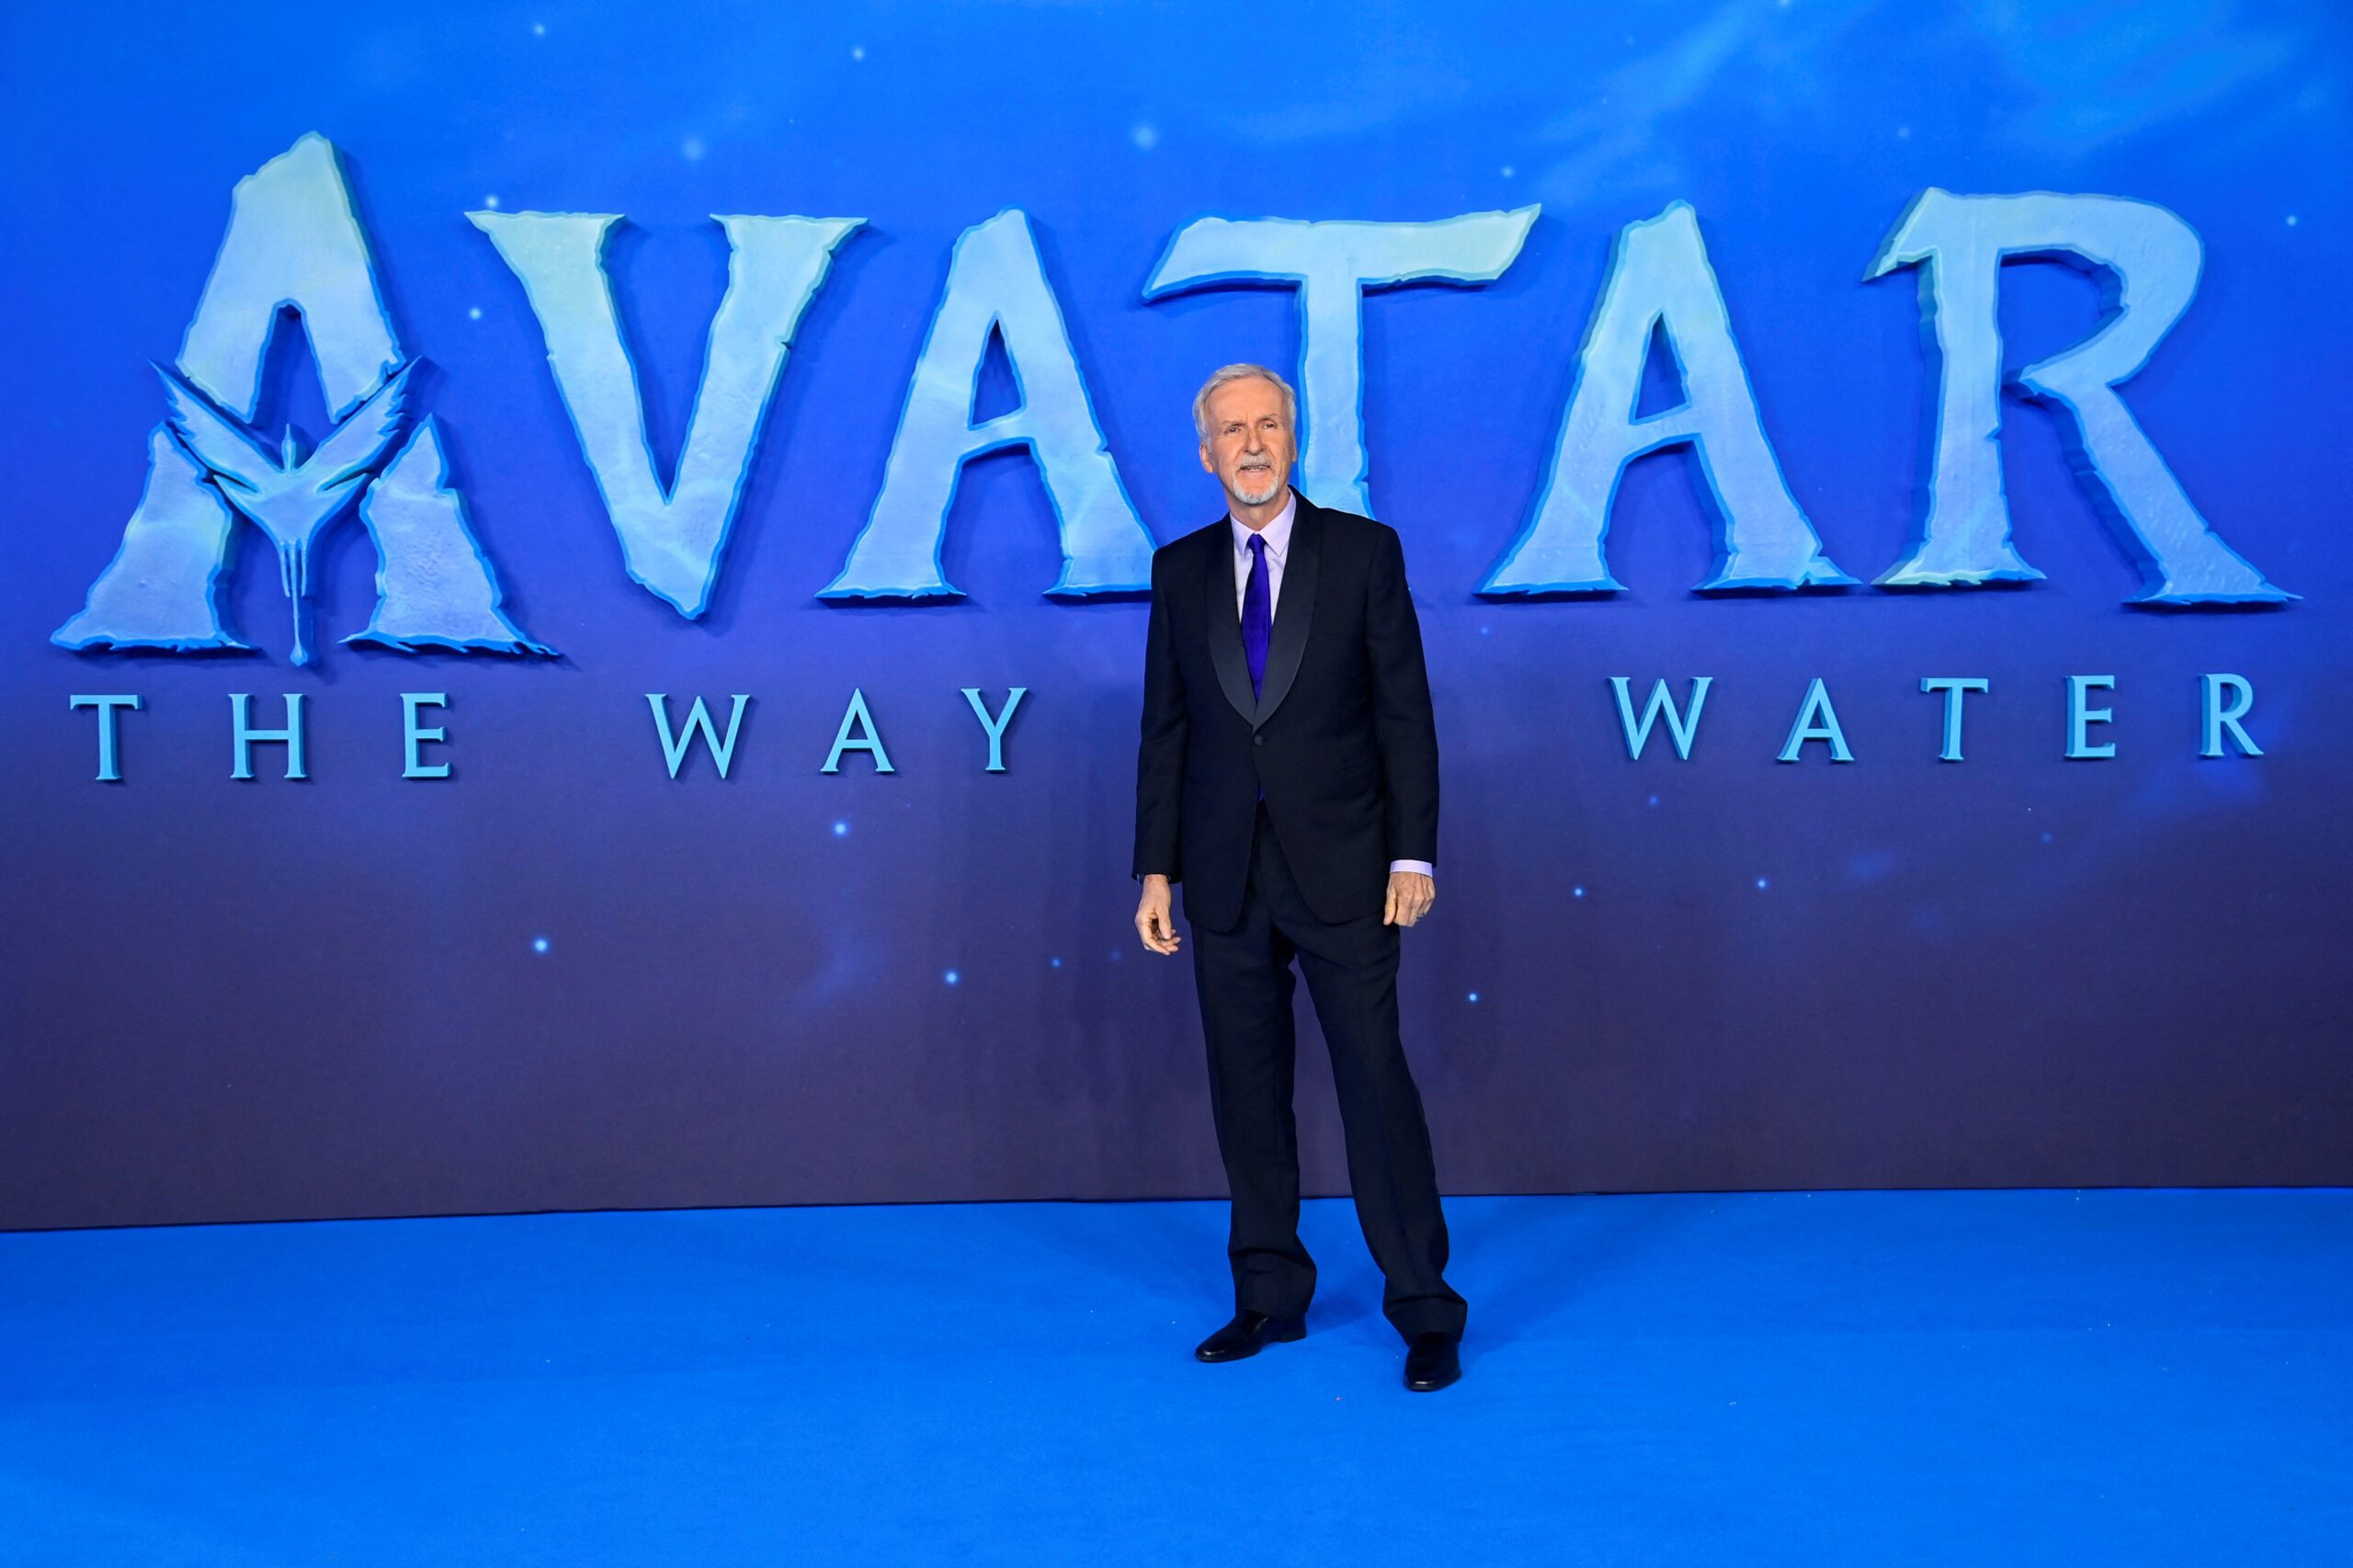 James Cameron on releasing long-awaited ‘Avatar’ sequel: ‘It’s a relief’